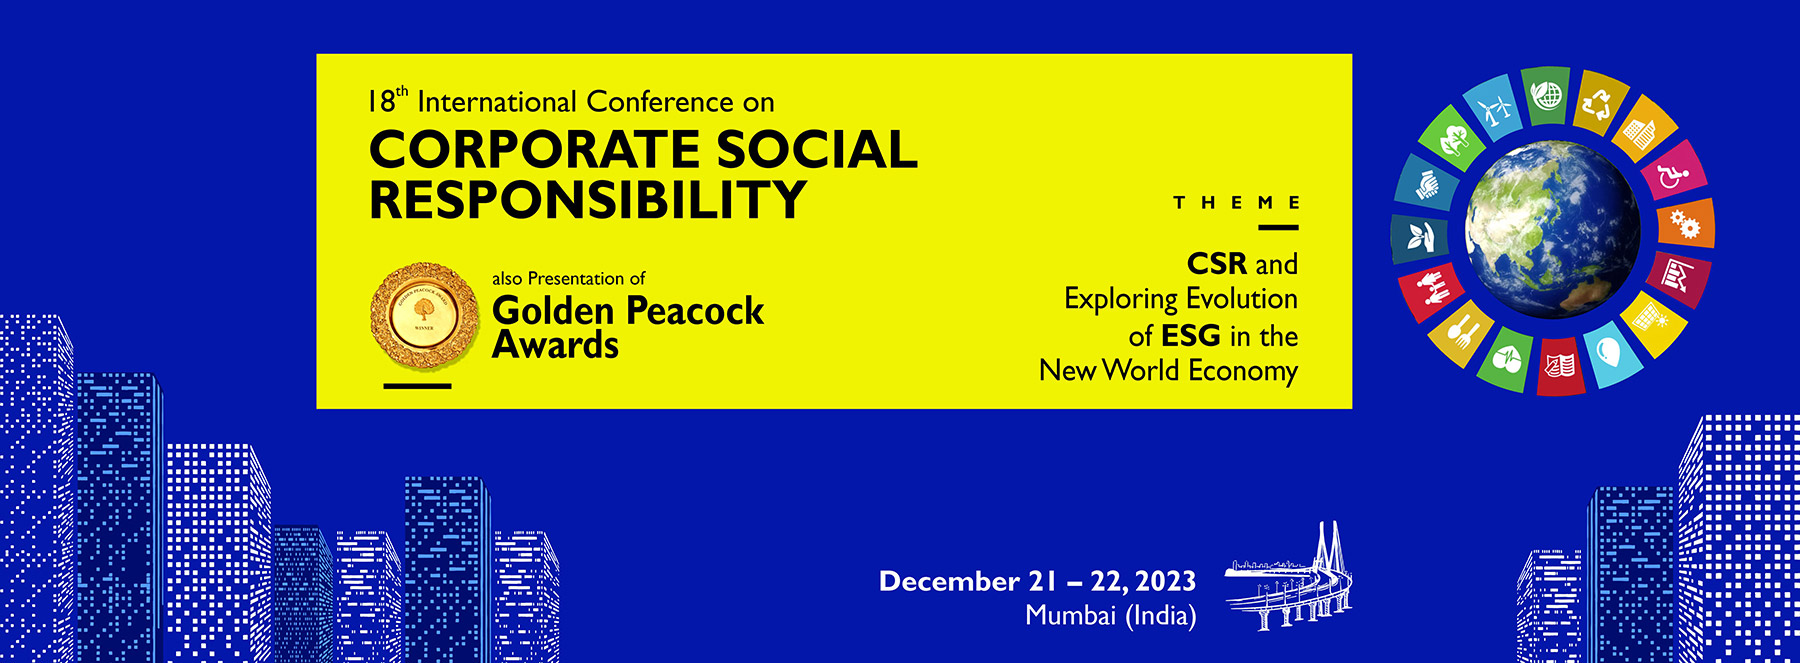 18th International Conference on Corporate Social Responsibility